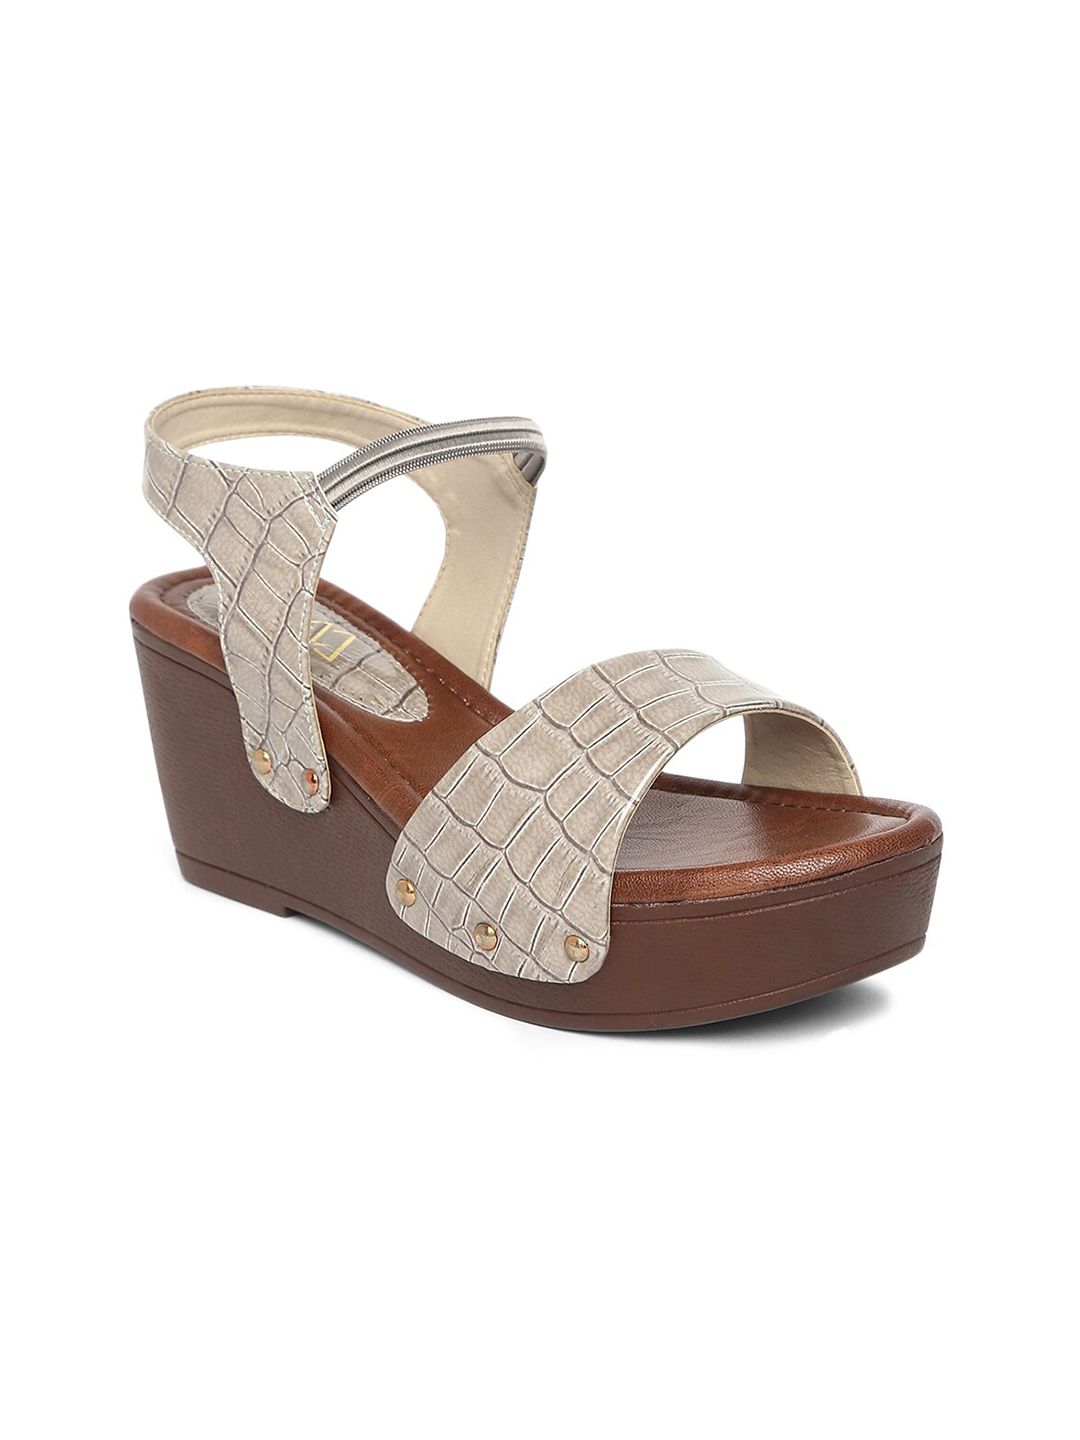 EVERLY Grey & Brown Textured Wedge Sandals Price in India